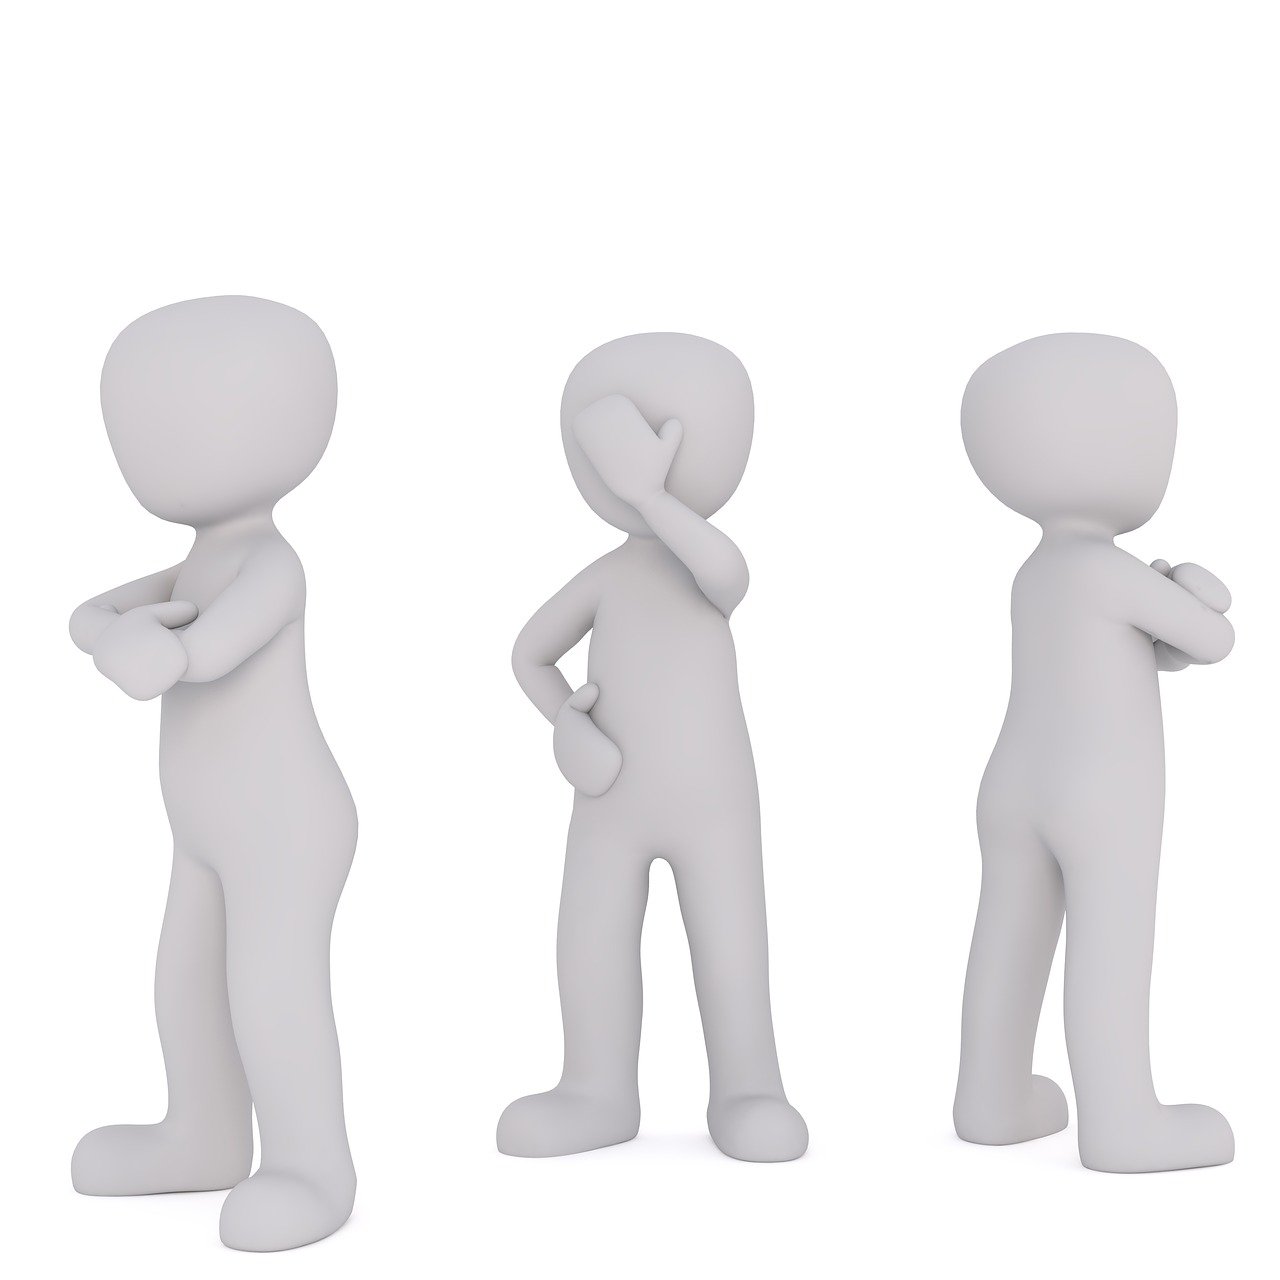 a group of people standing next to each other, trending on pixabay, conceptual art, hear no evil, ambient occlusion:3, crossed arms, three views